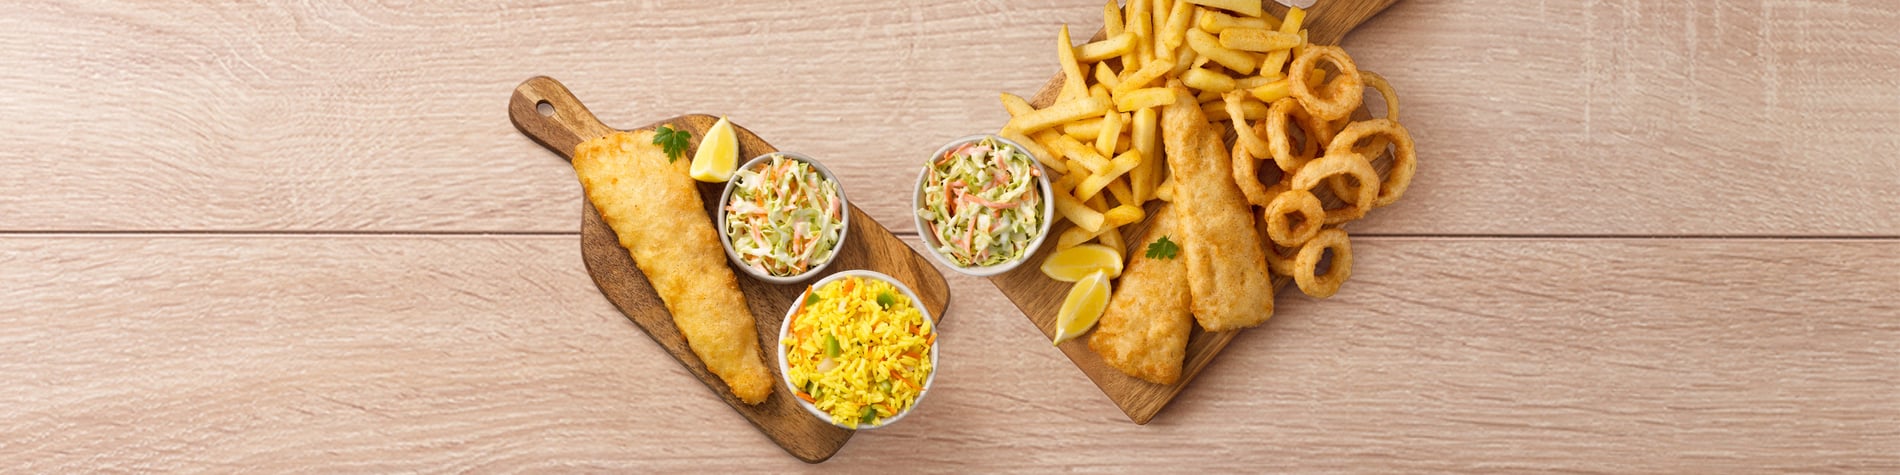 Seafood platter deal from Fishaways showing a Hake, Rice & Coleslaw meal and a Hake, Chips, Coleslaw & Onion Rings Platter on a wood background